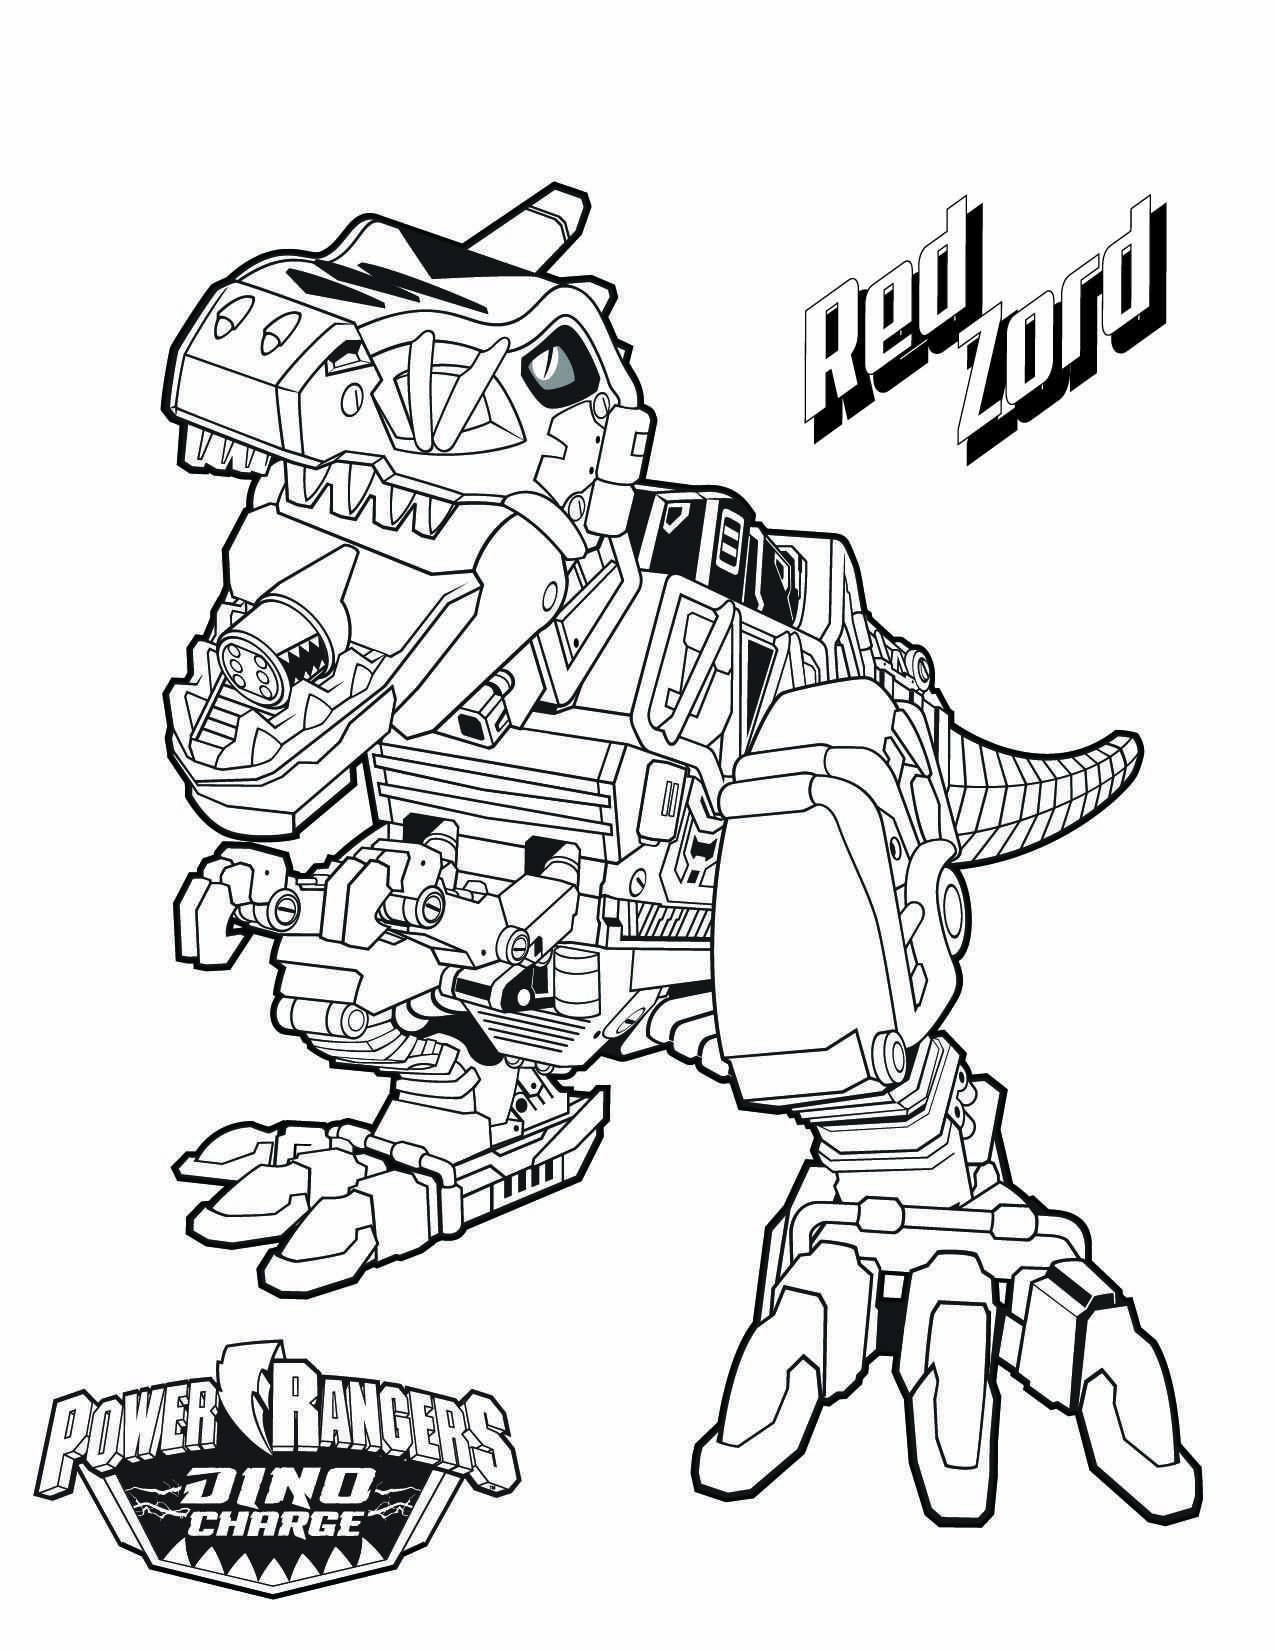 Tyrannosaurus Rex Coloring Page Power Rangers The Official Power Rangers Website Powe